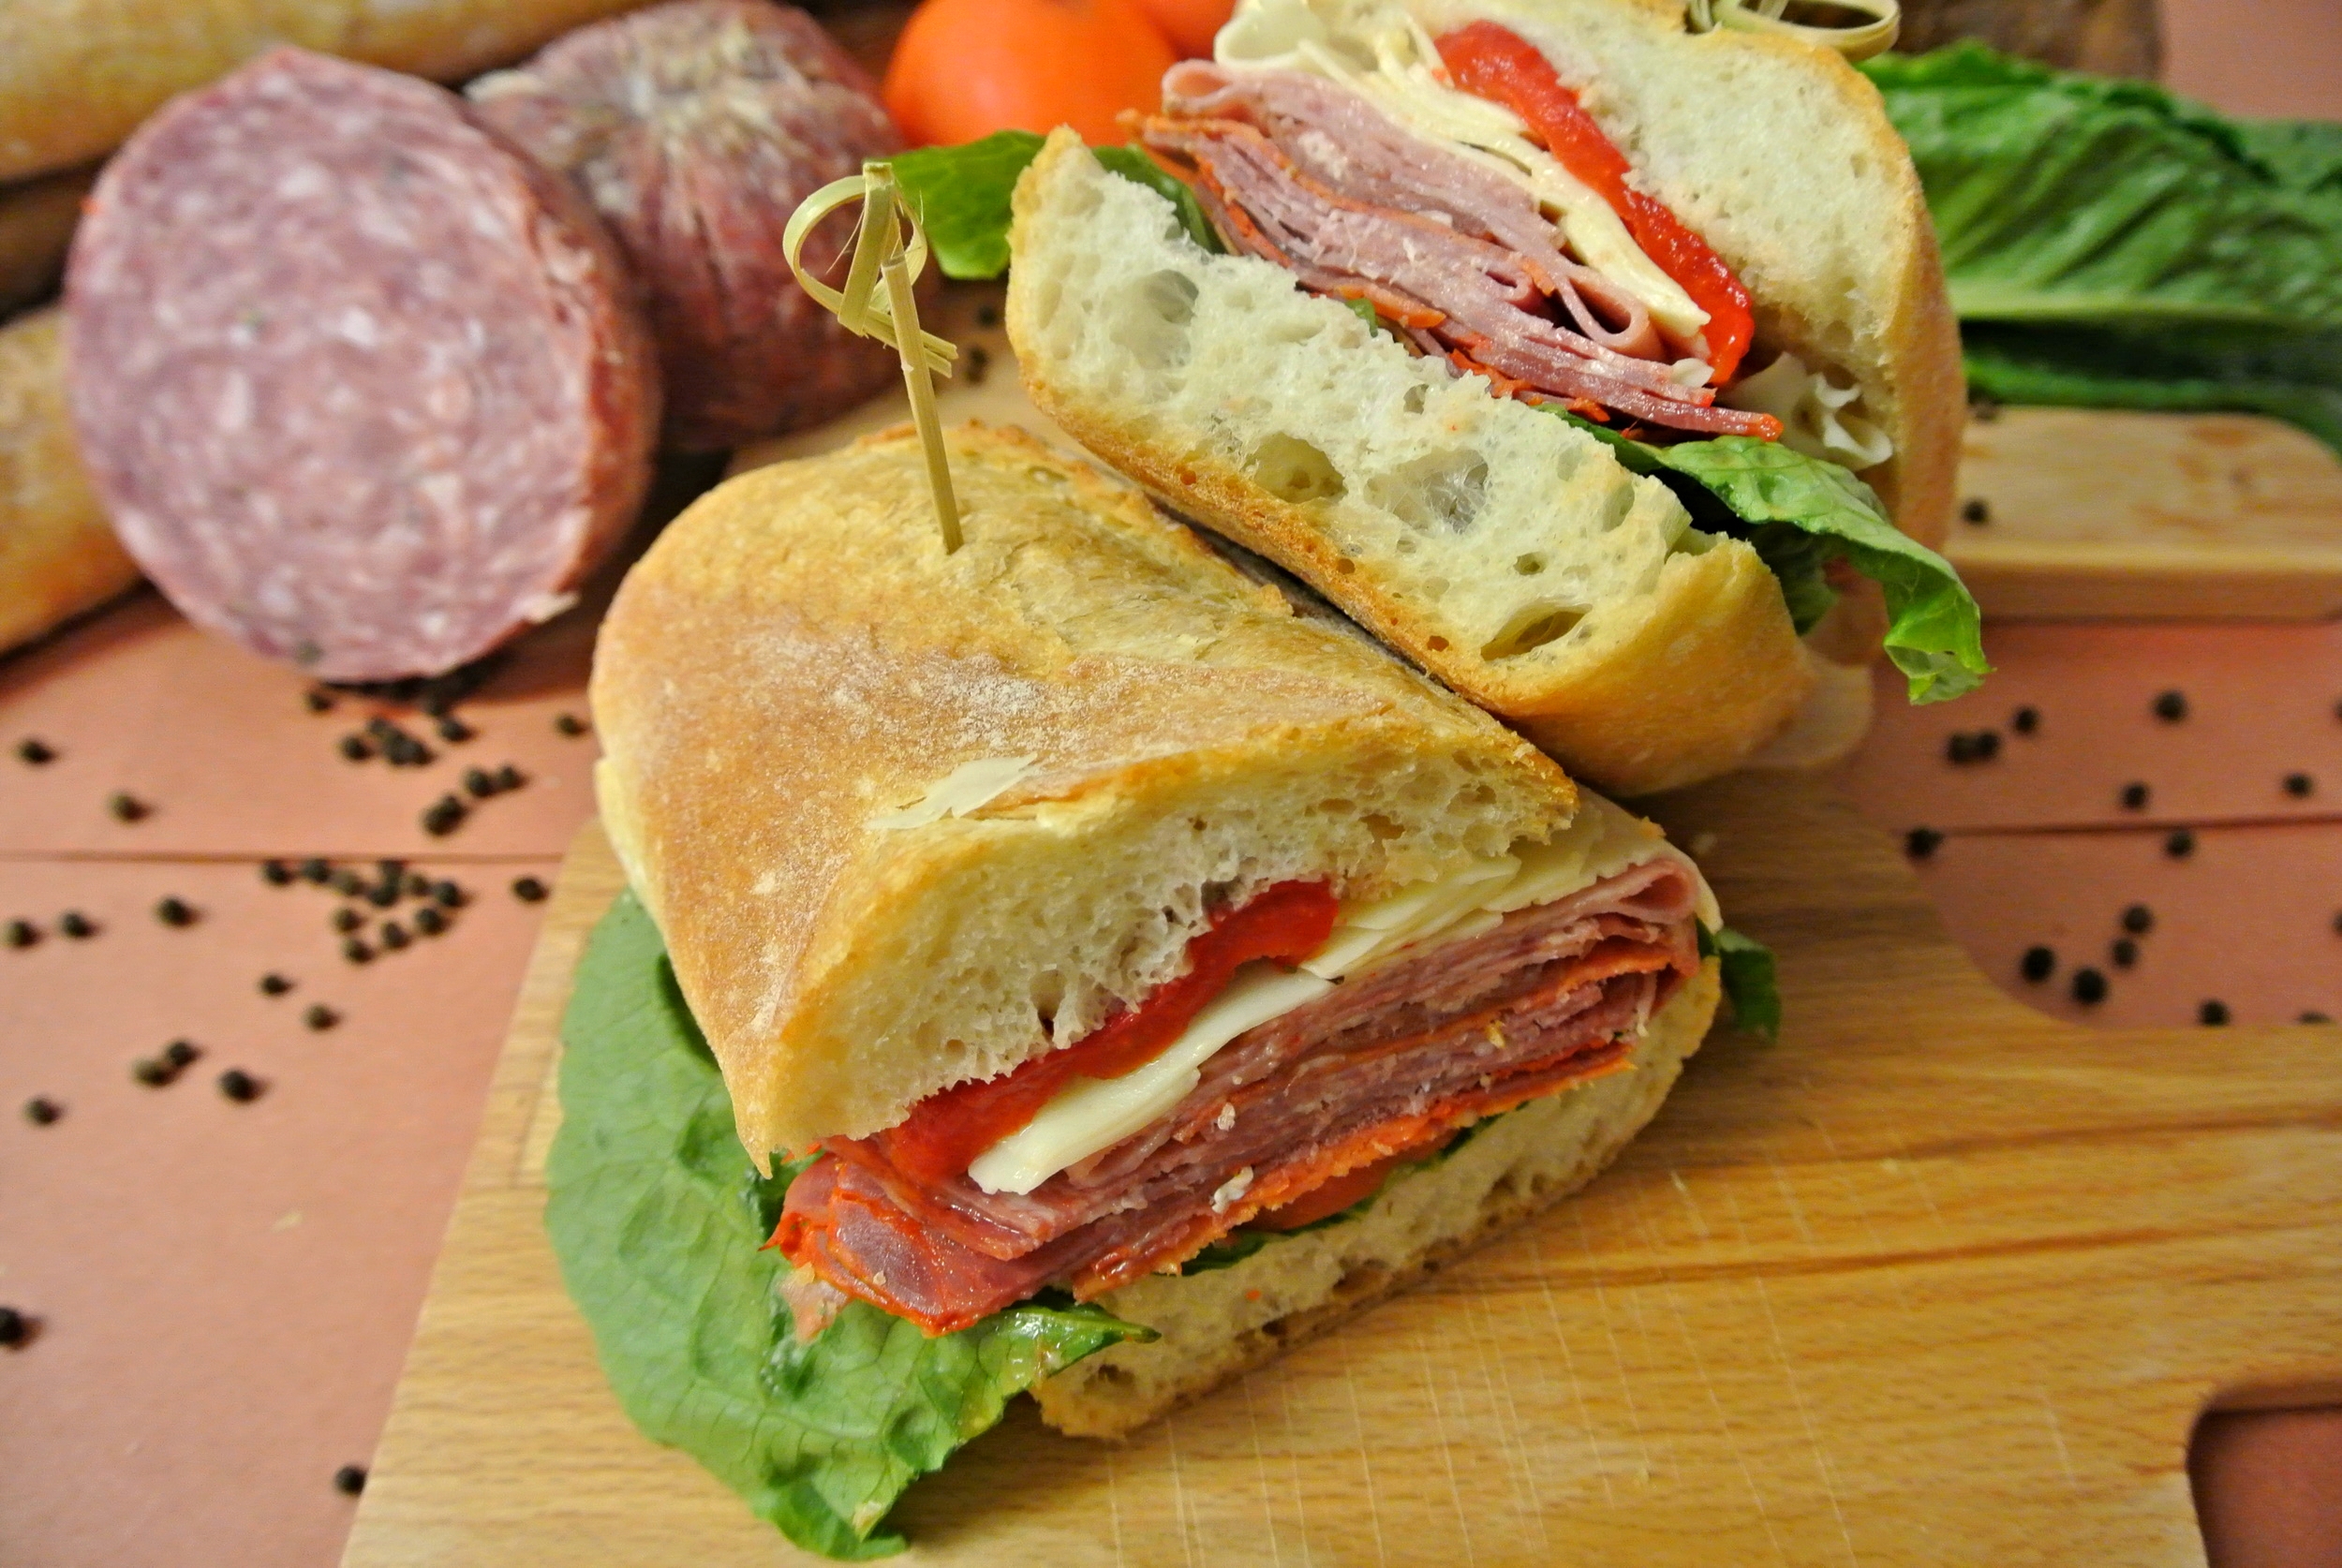  il padrino- a hearty sandwich with traditional Italian deli meats 